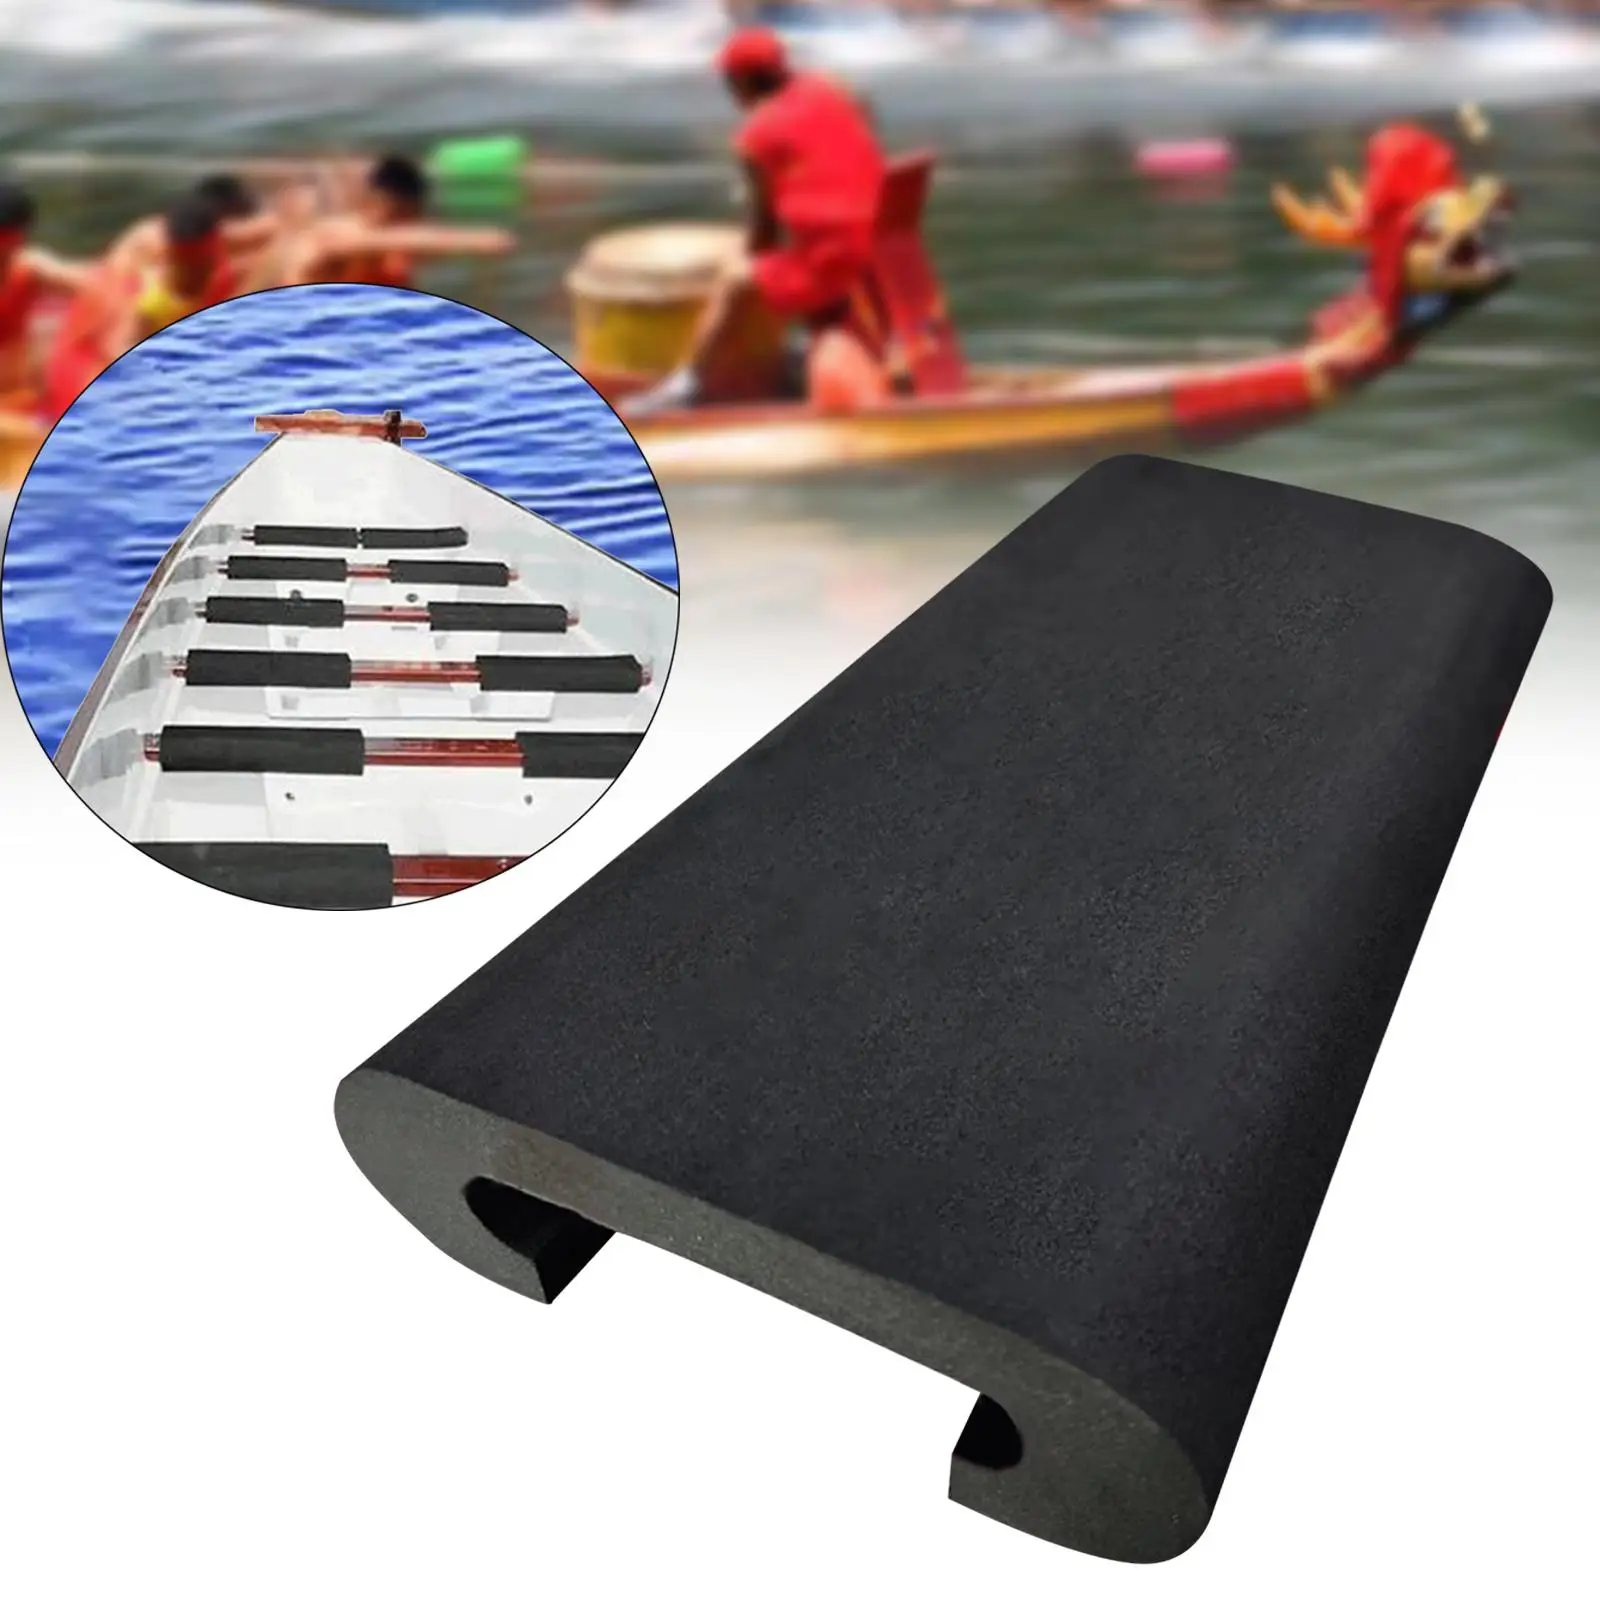 Dragon Boat Seat Boat Cushion Seat Dragon Boat Saddle for Competition Water Rowing Machines Rower Boat Kayak Kite Boat Training